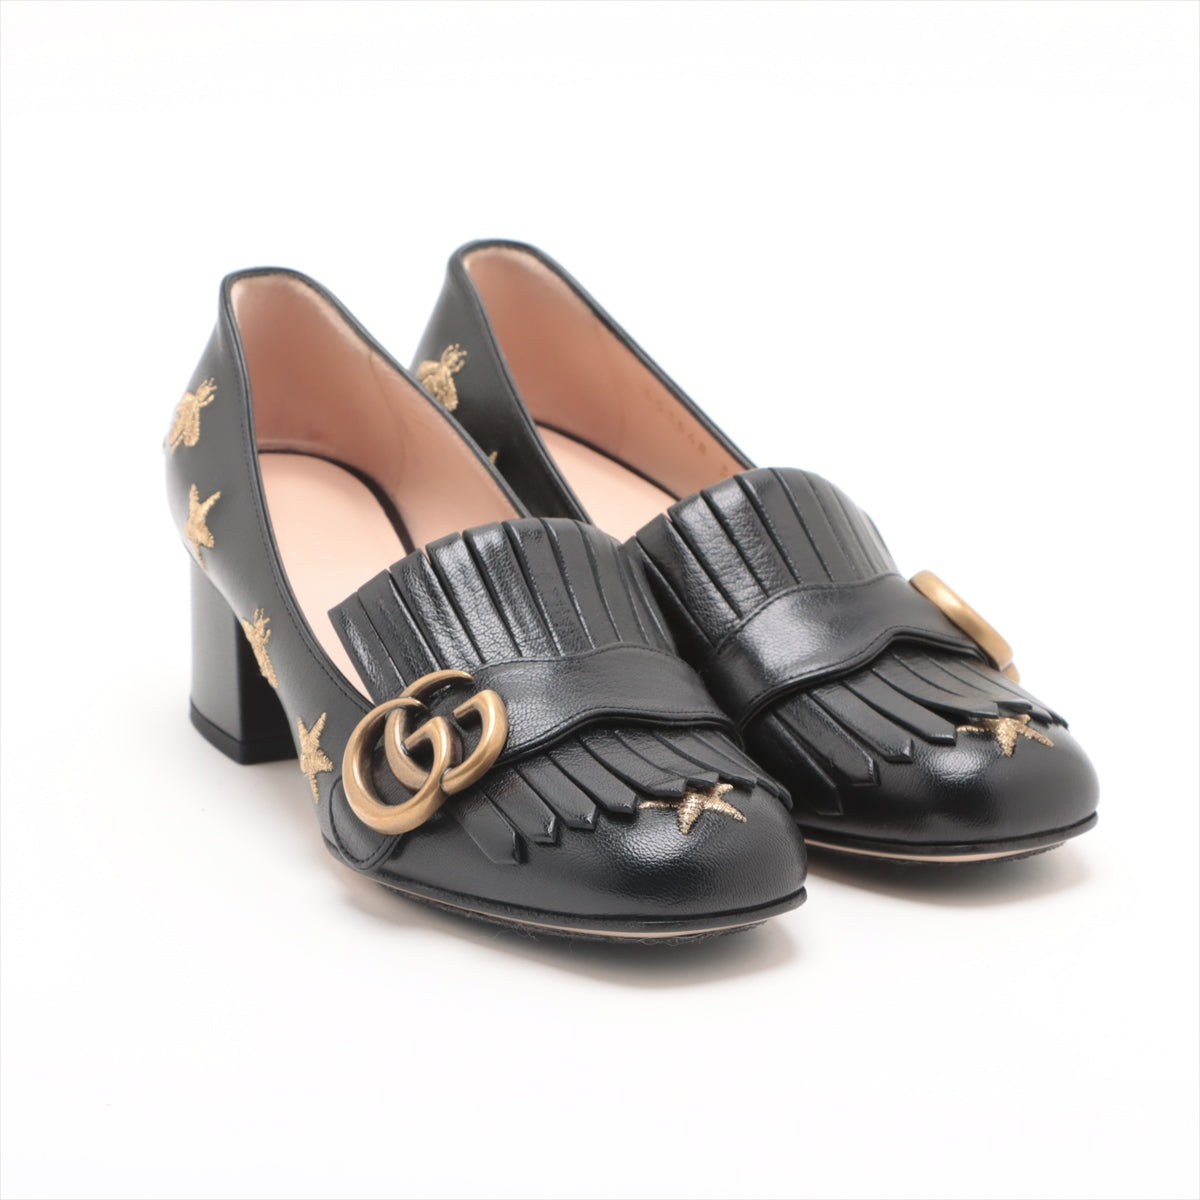 Gucci GG Marmont Leather Pumps 35.5 Ladies' Black 551548 Bee Star embroidery Fringe Box Included